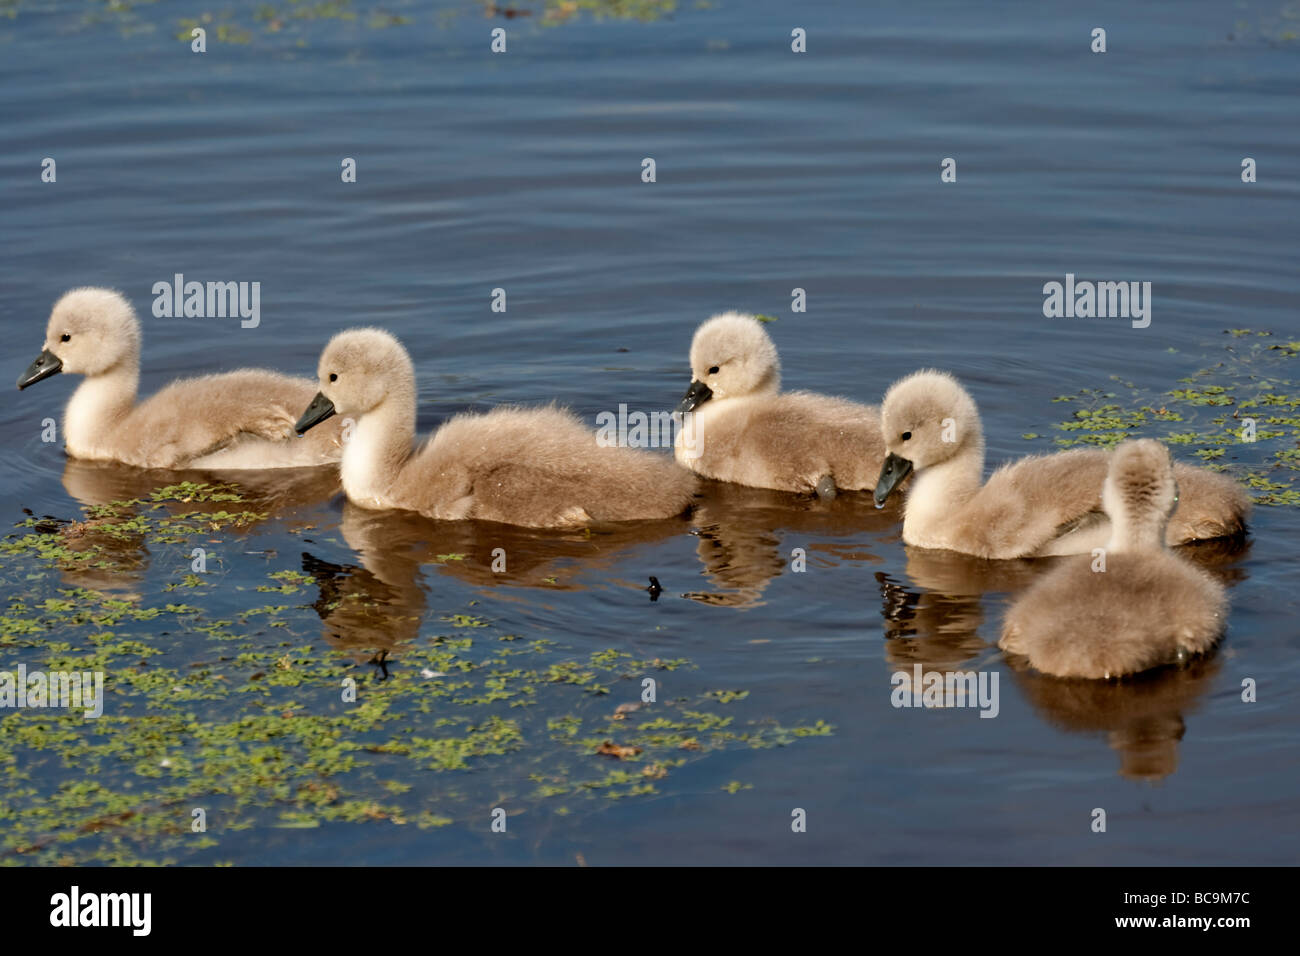 Five Cygnets on on a pond or lake Stock Photo